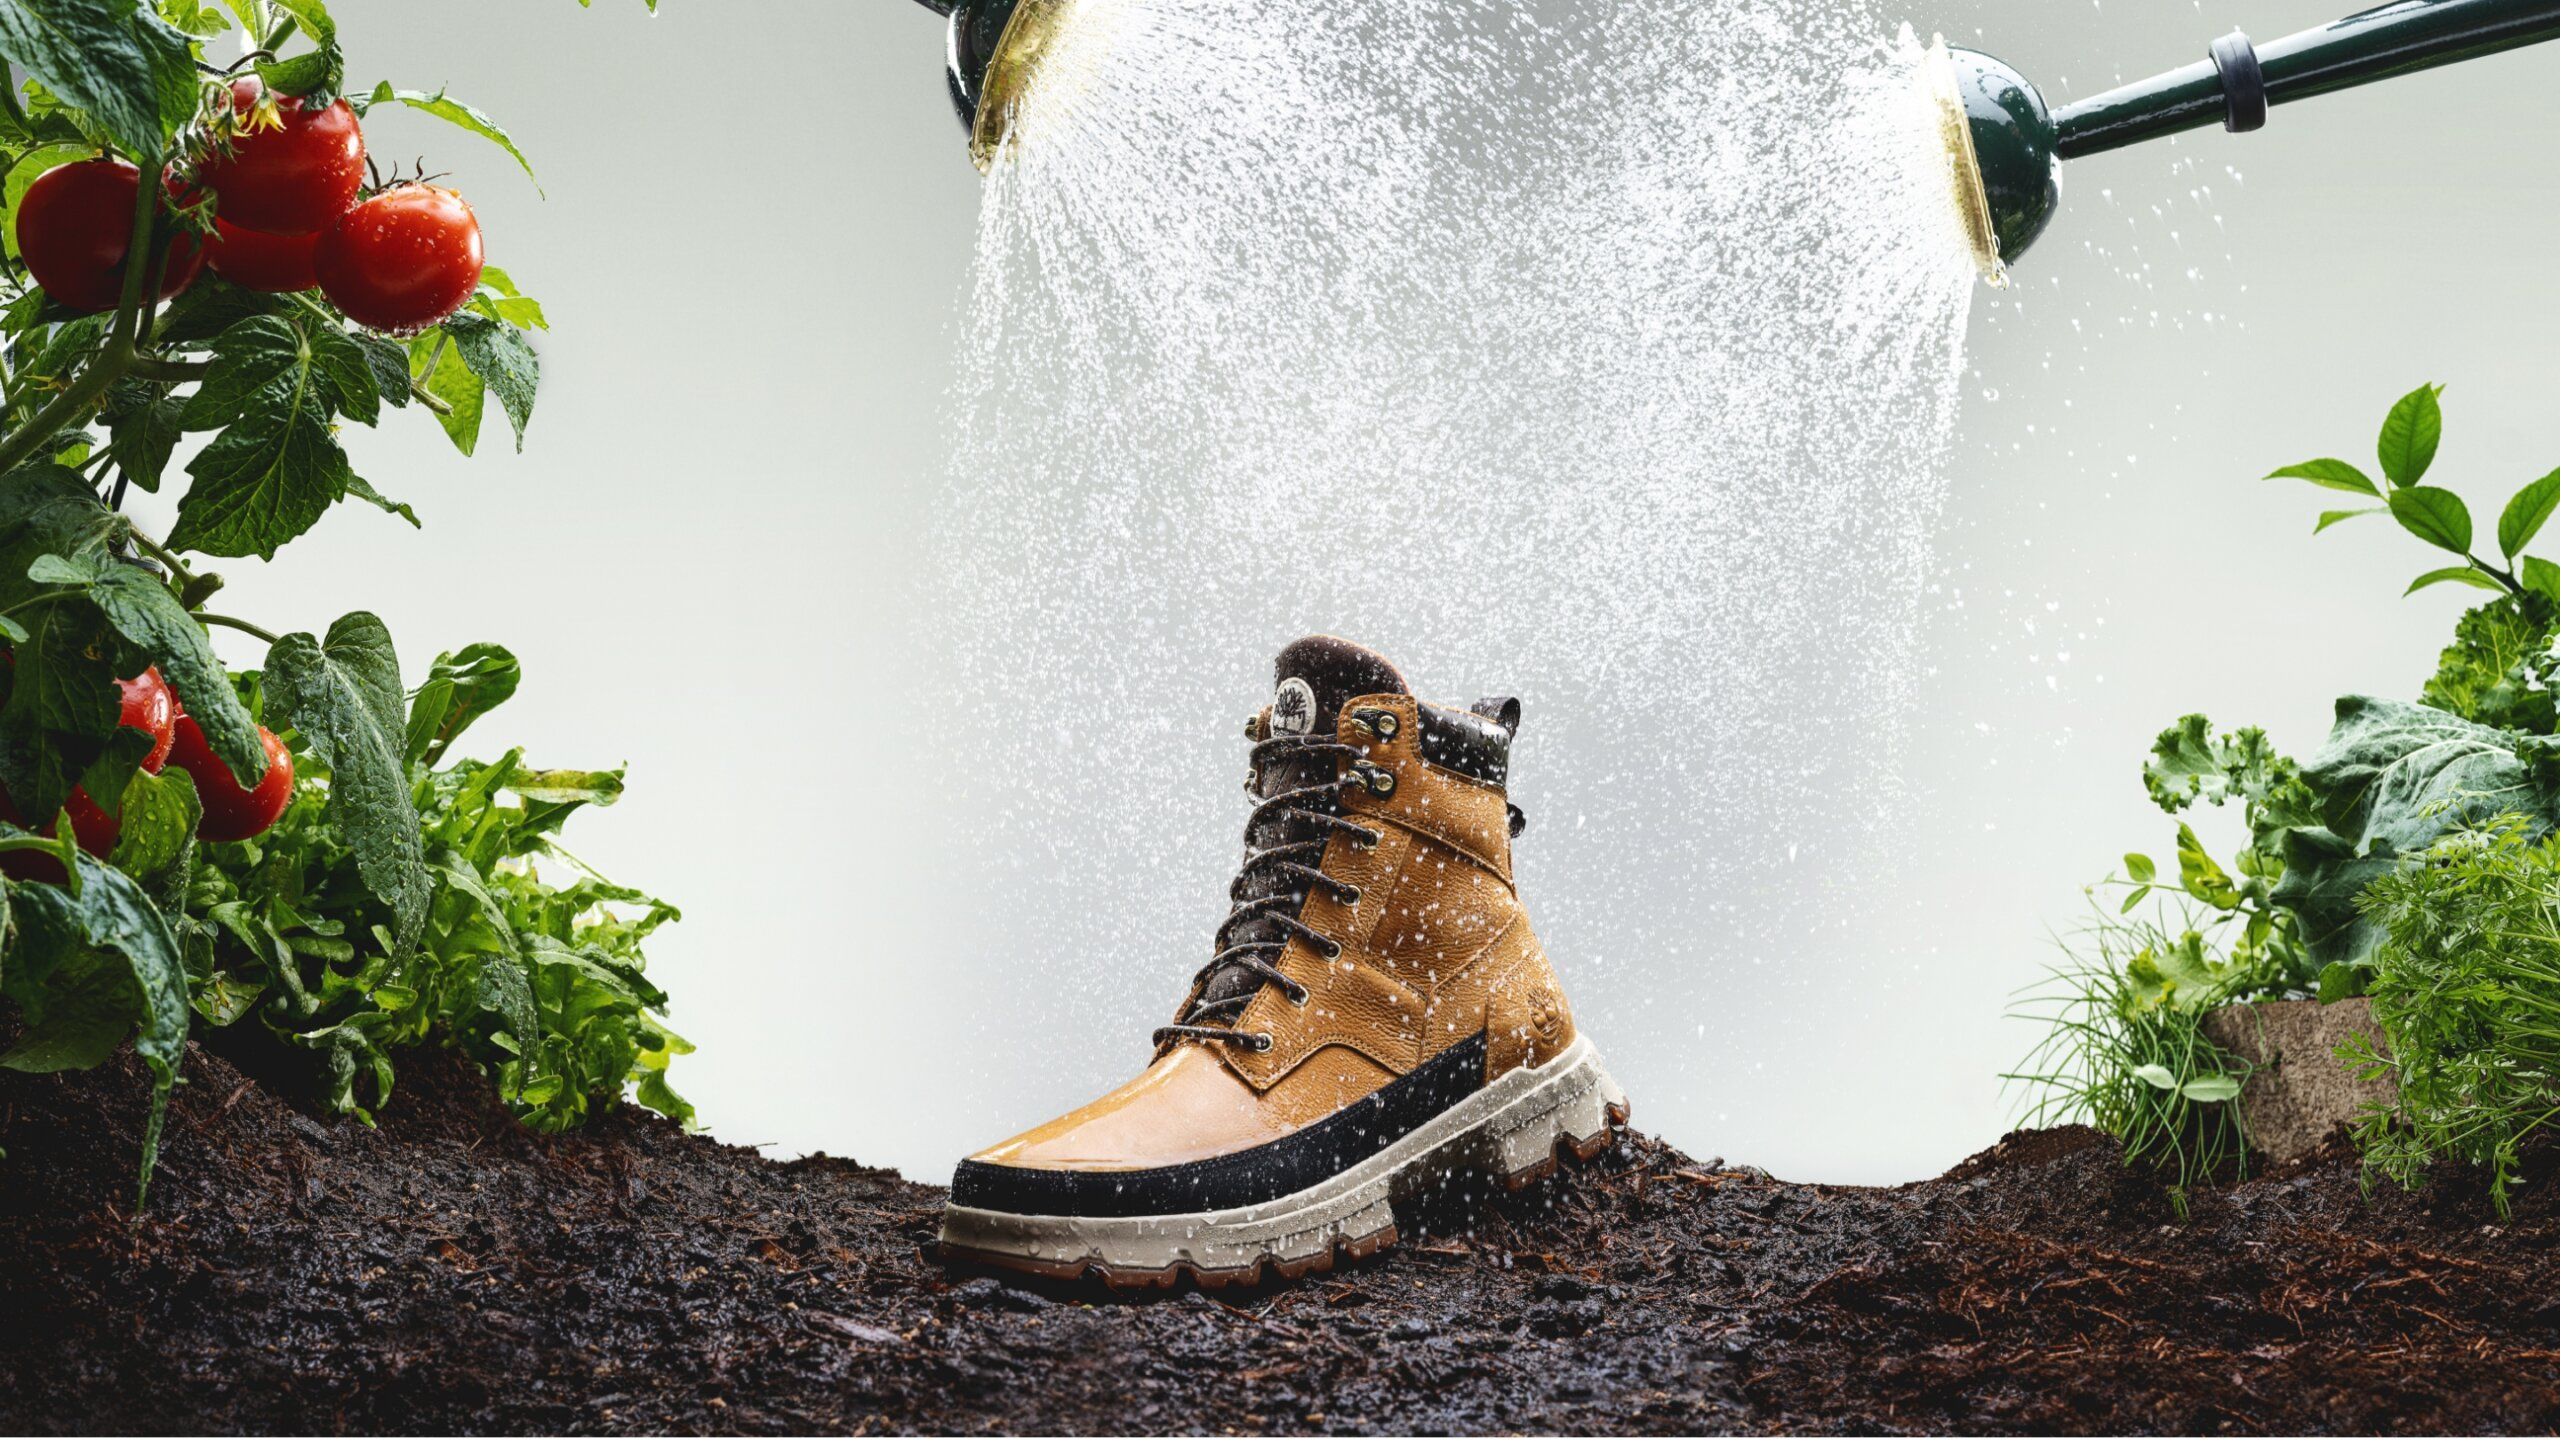 Timberland boot in garden being watered